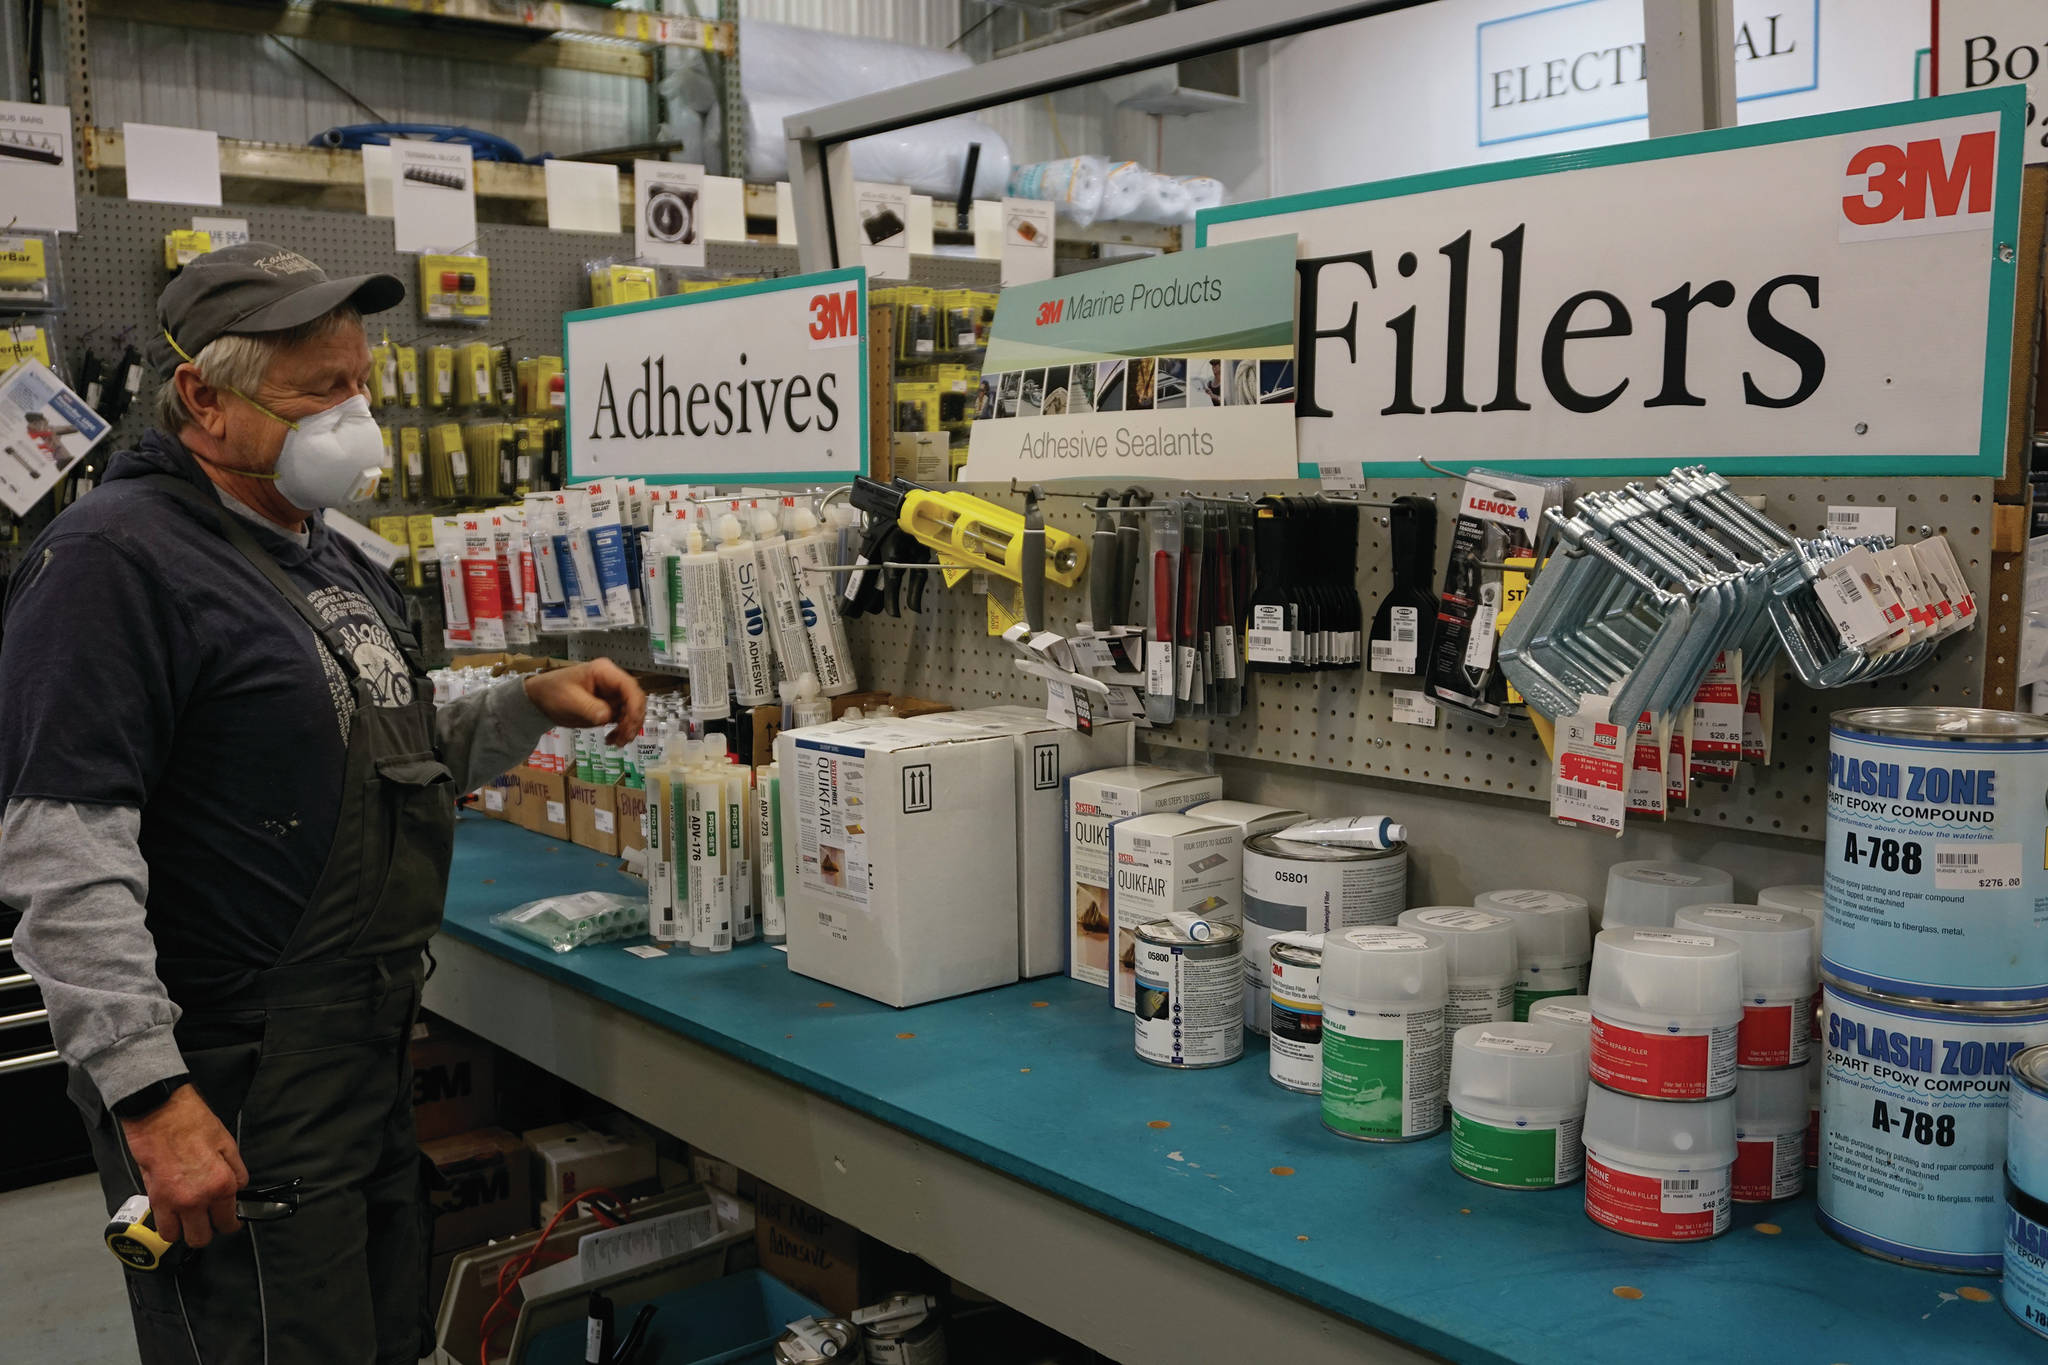 Eric Sloth, owner of Homer Marine, stands by a display of 3M products on Thursday, Dec. 17, 2020, at his store in the Northern Enterprise Boatyard in Homer, Alaska. (Photo by MIchael Armstrong/Homer News)